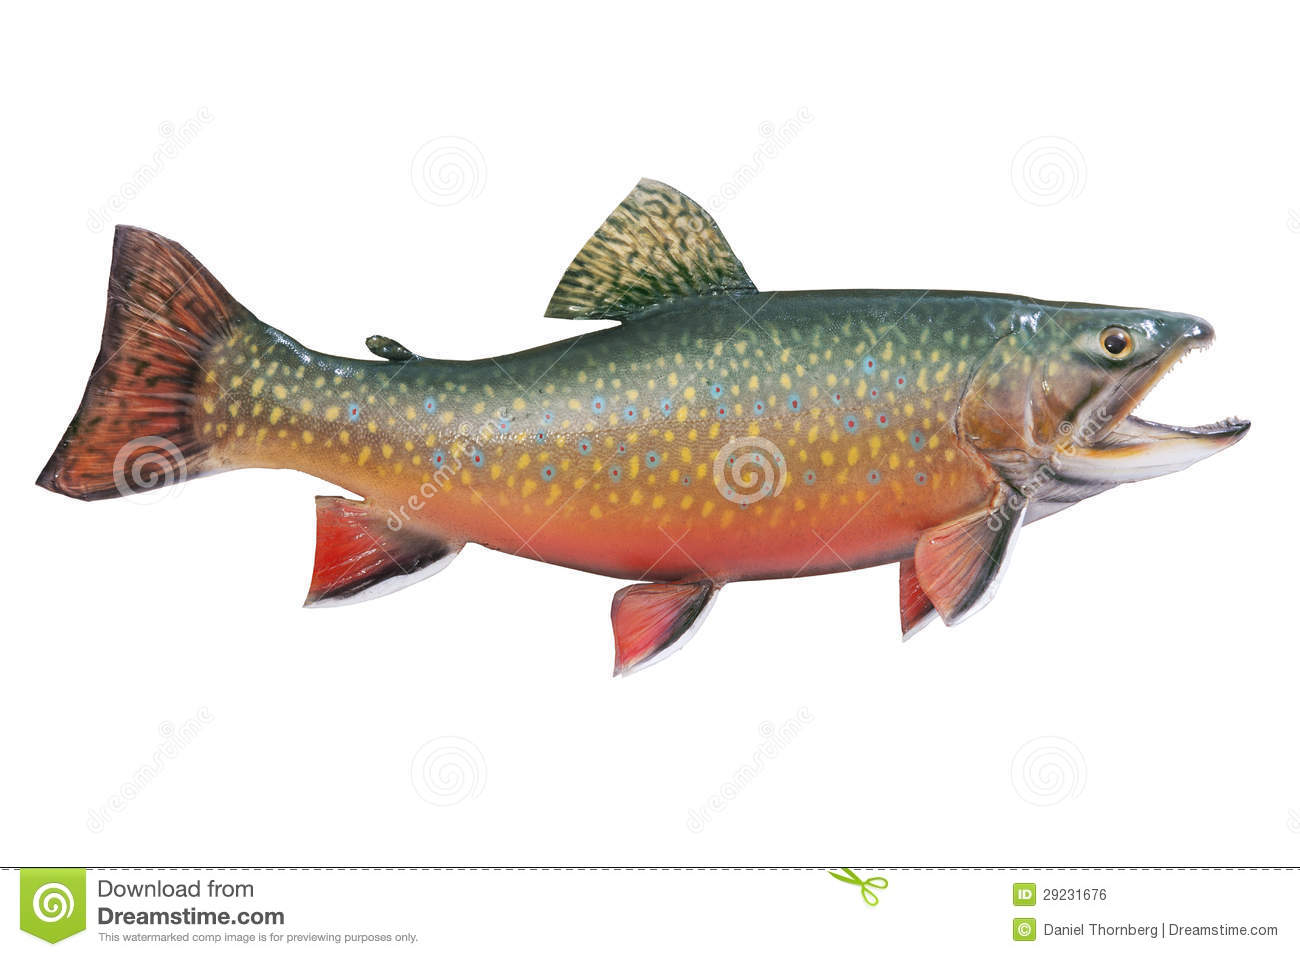 Male Brook Or Speckled Trout In Spawning Colors Is Royalty Free Stock